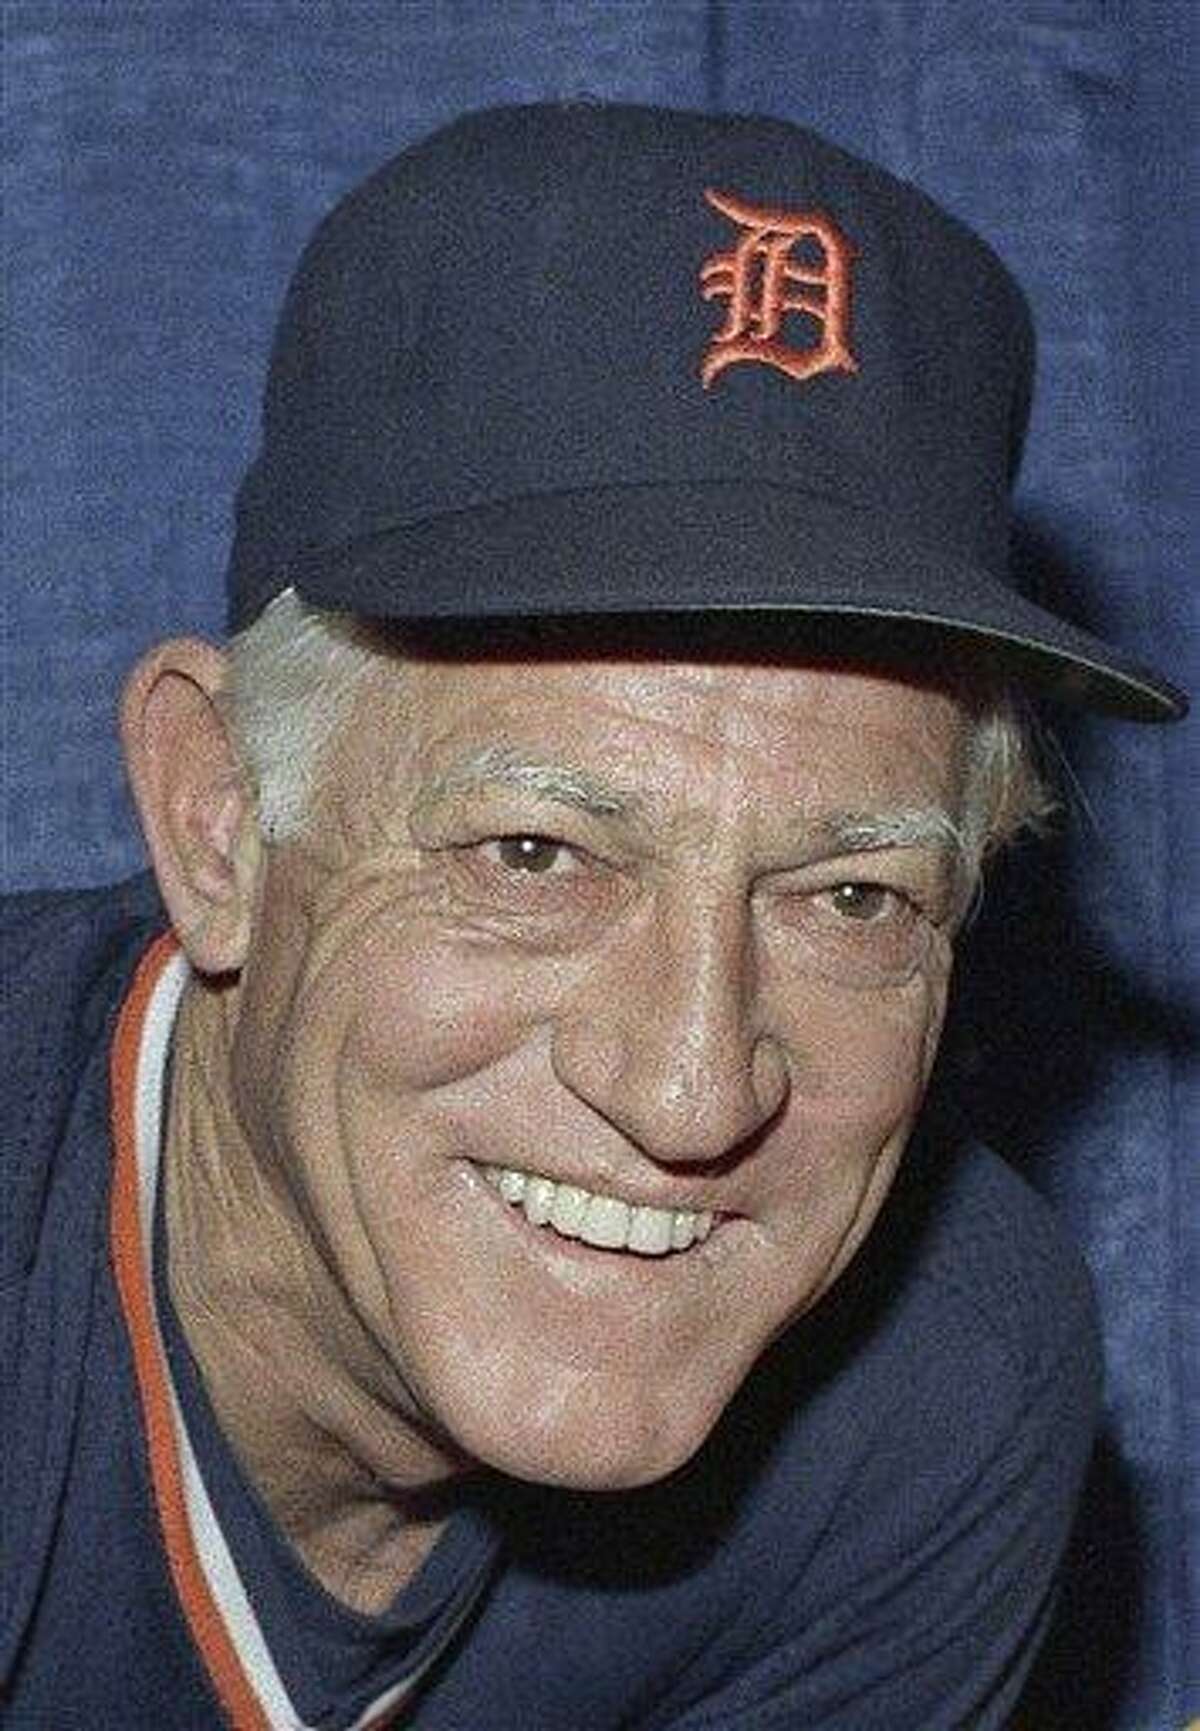 Hall of Fame manager Sparky Anderson dead at 76